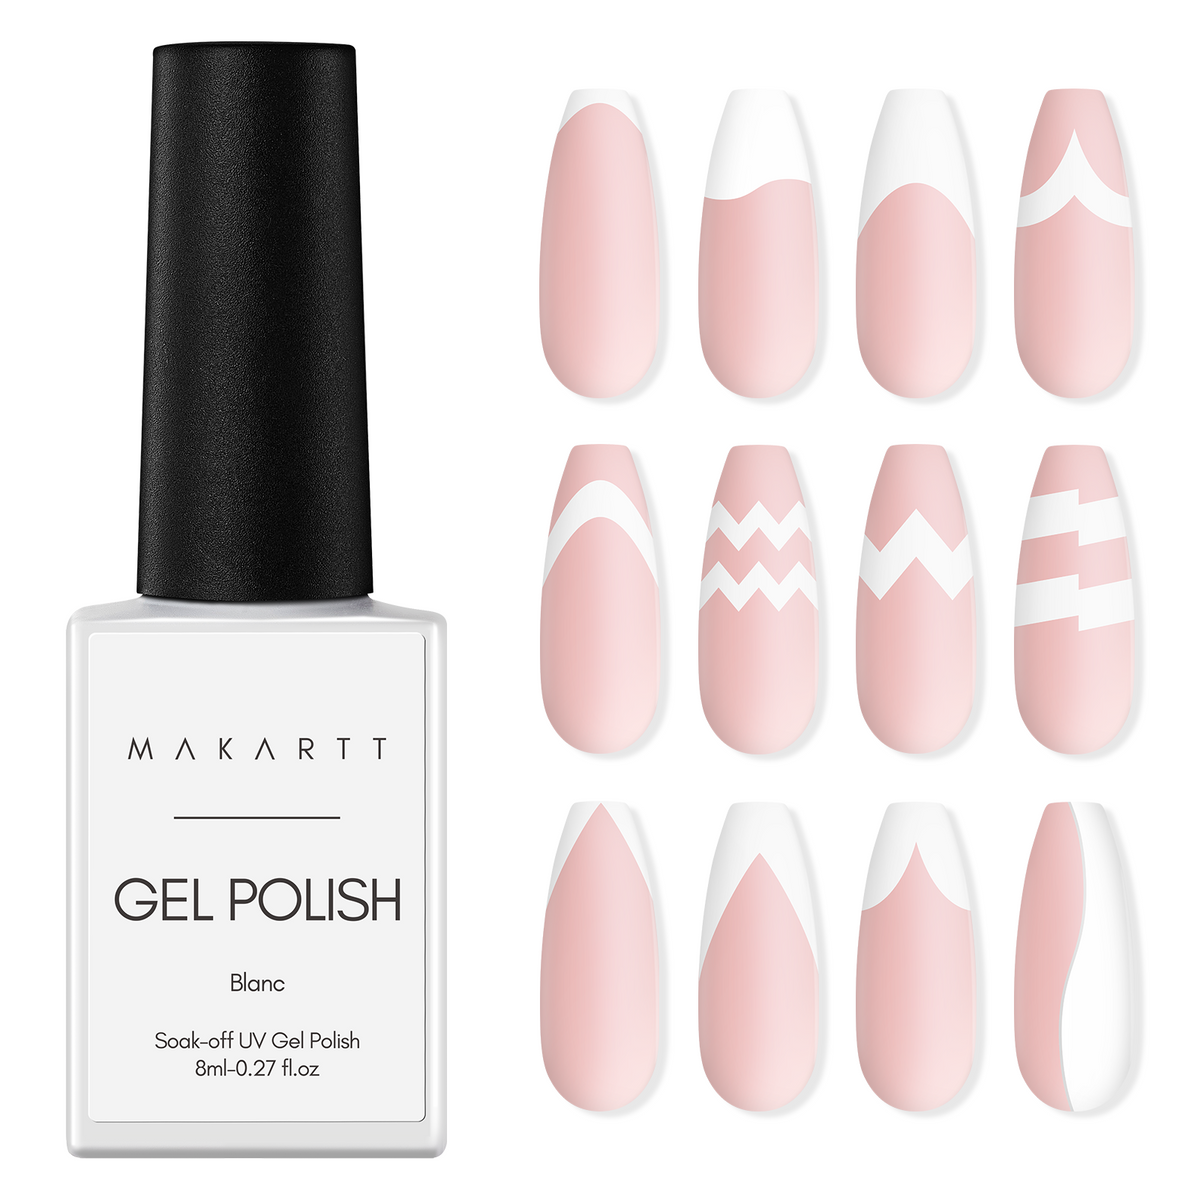 Gel Polish Stickers Kit for French Nail